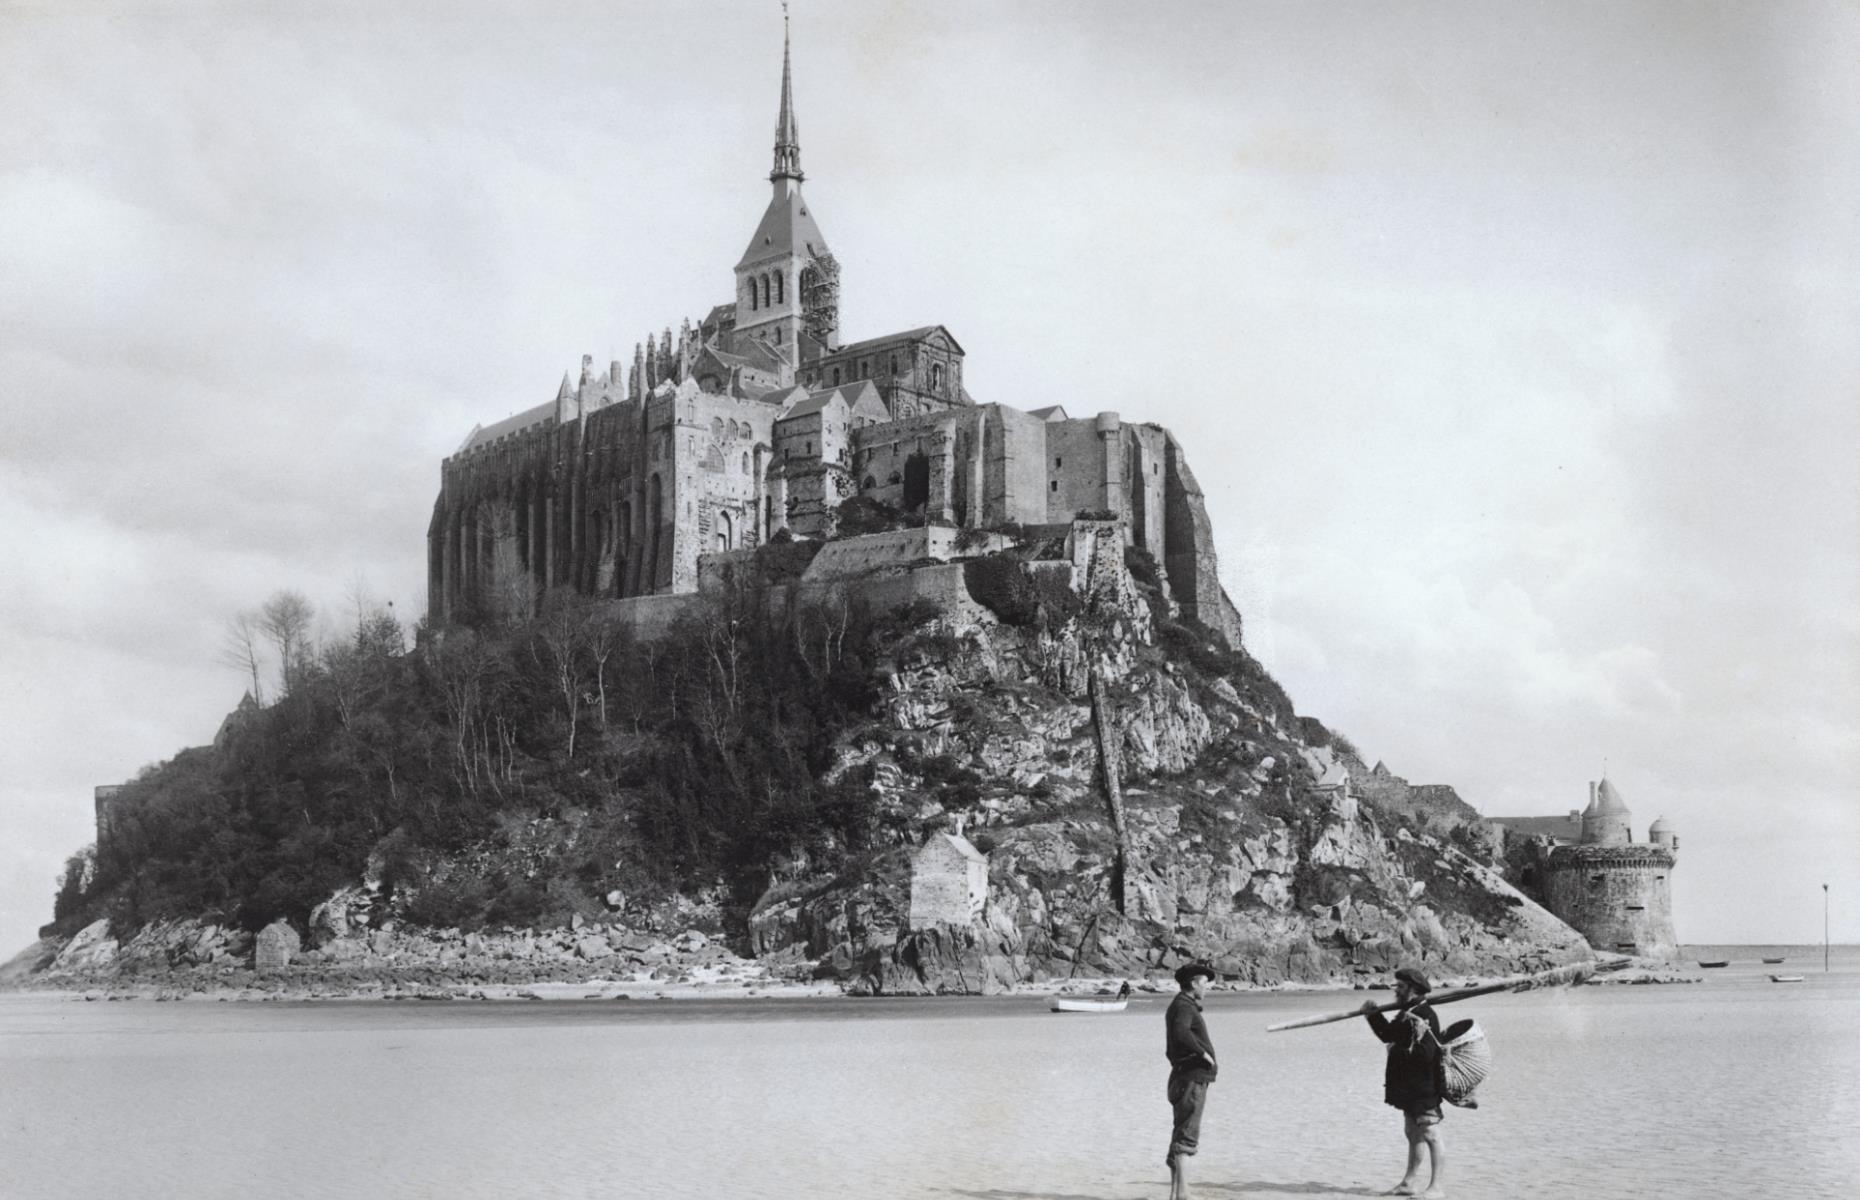 A picturesque monastery sitting atop a small island off the coast of Normandy, Mont Saint-Michel is one of the most visited landmarks in France. Built in the 8th century, it was a popular attraction from the get-go, drawing in a vast number of pilgrims from across Europe who were desperate to see the magnificent structure. Pictured here in circa 1900, two fishermen can be seen on the tidal flats in the foreground.